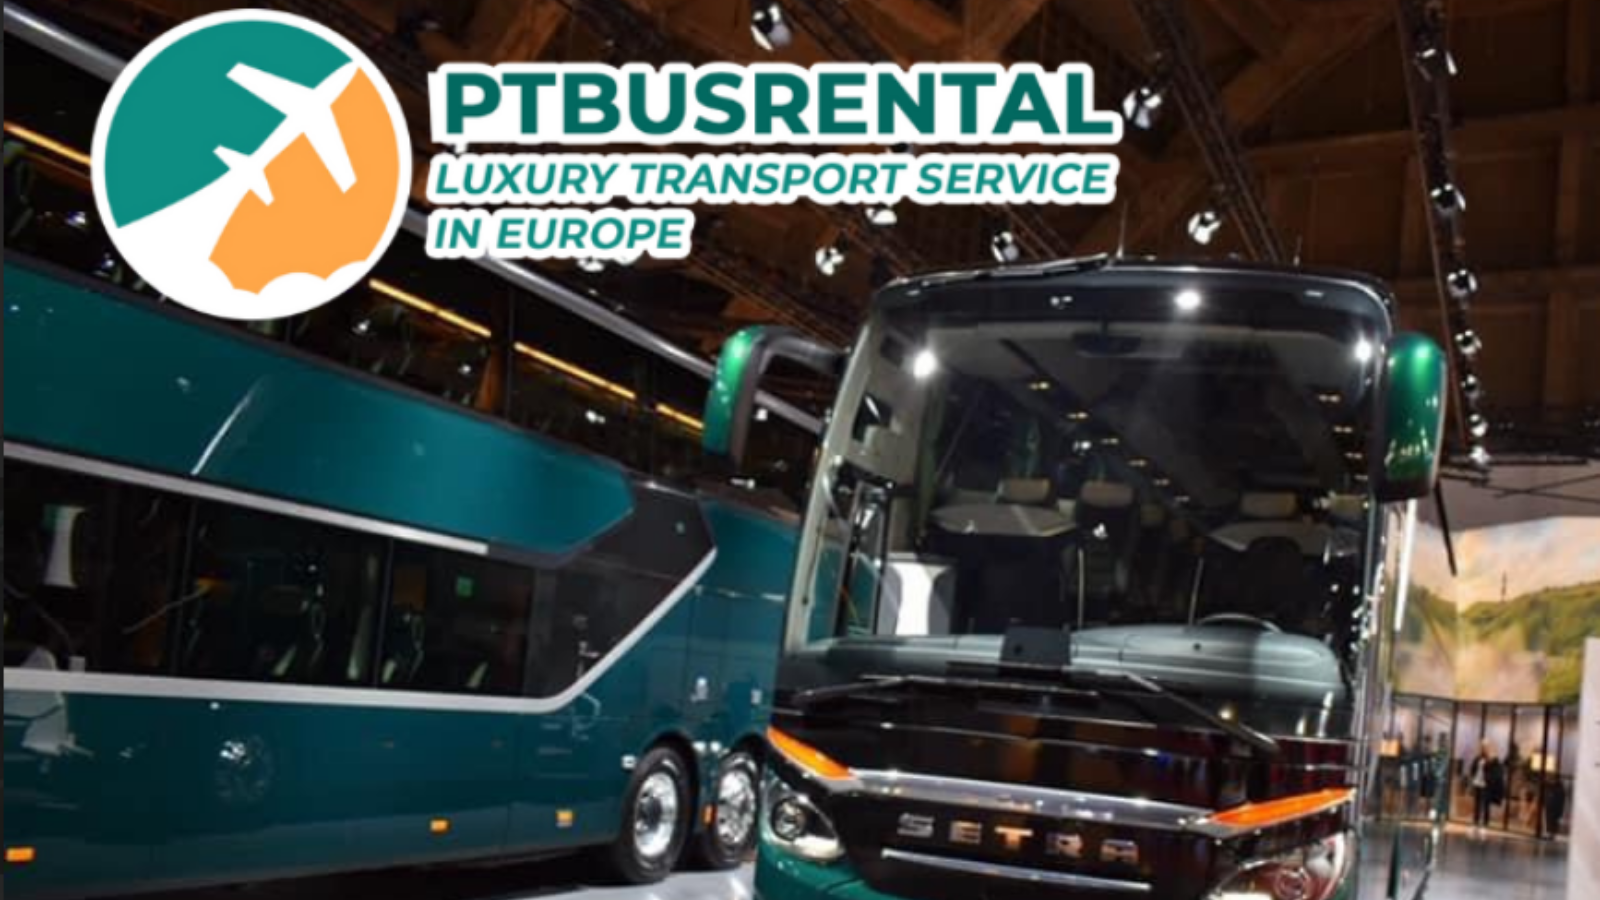 Join PTBusrental on coach rental in Norway to buy souvenirs